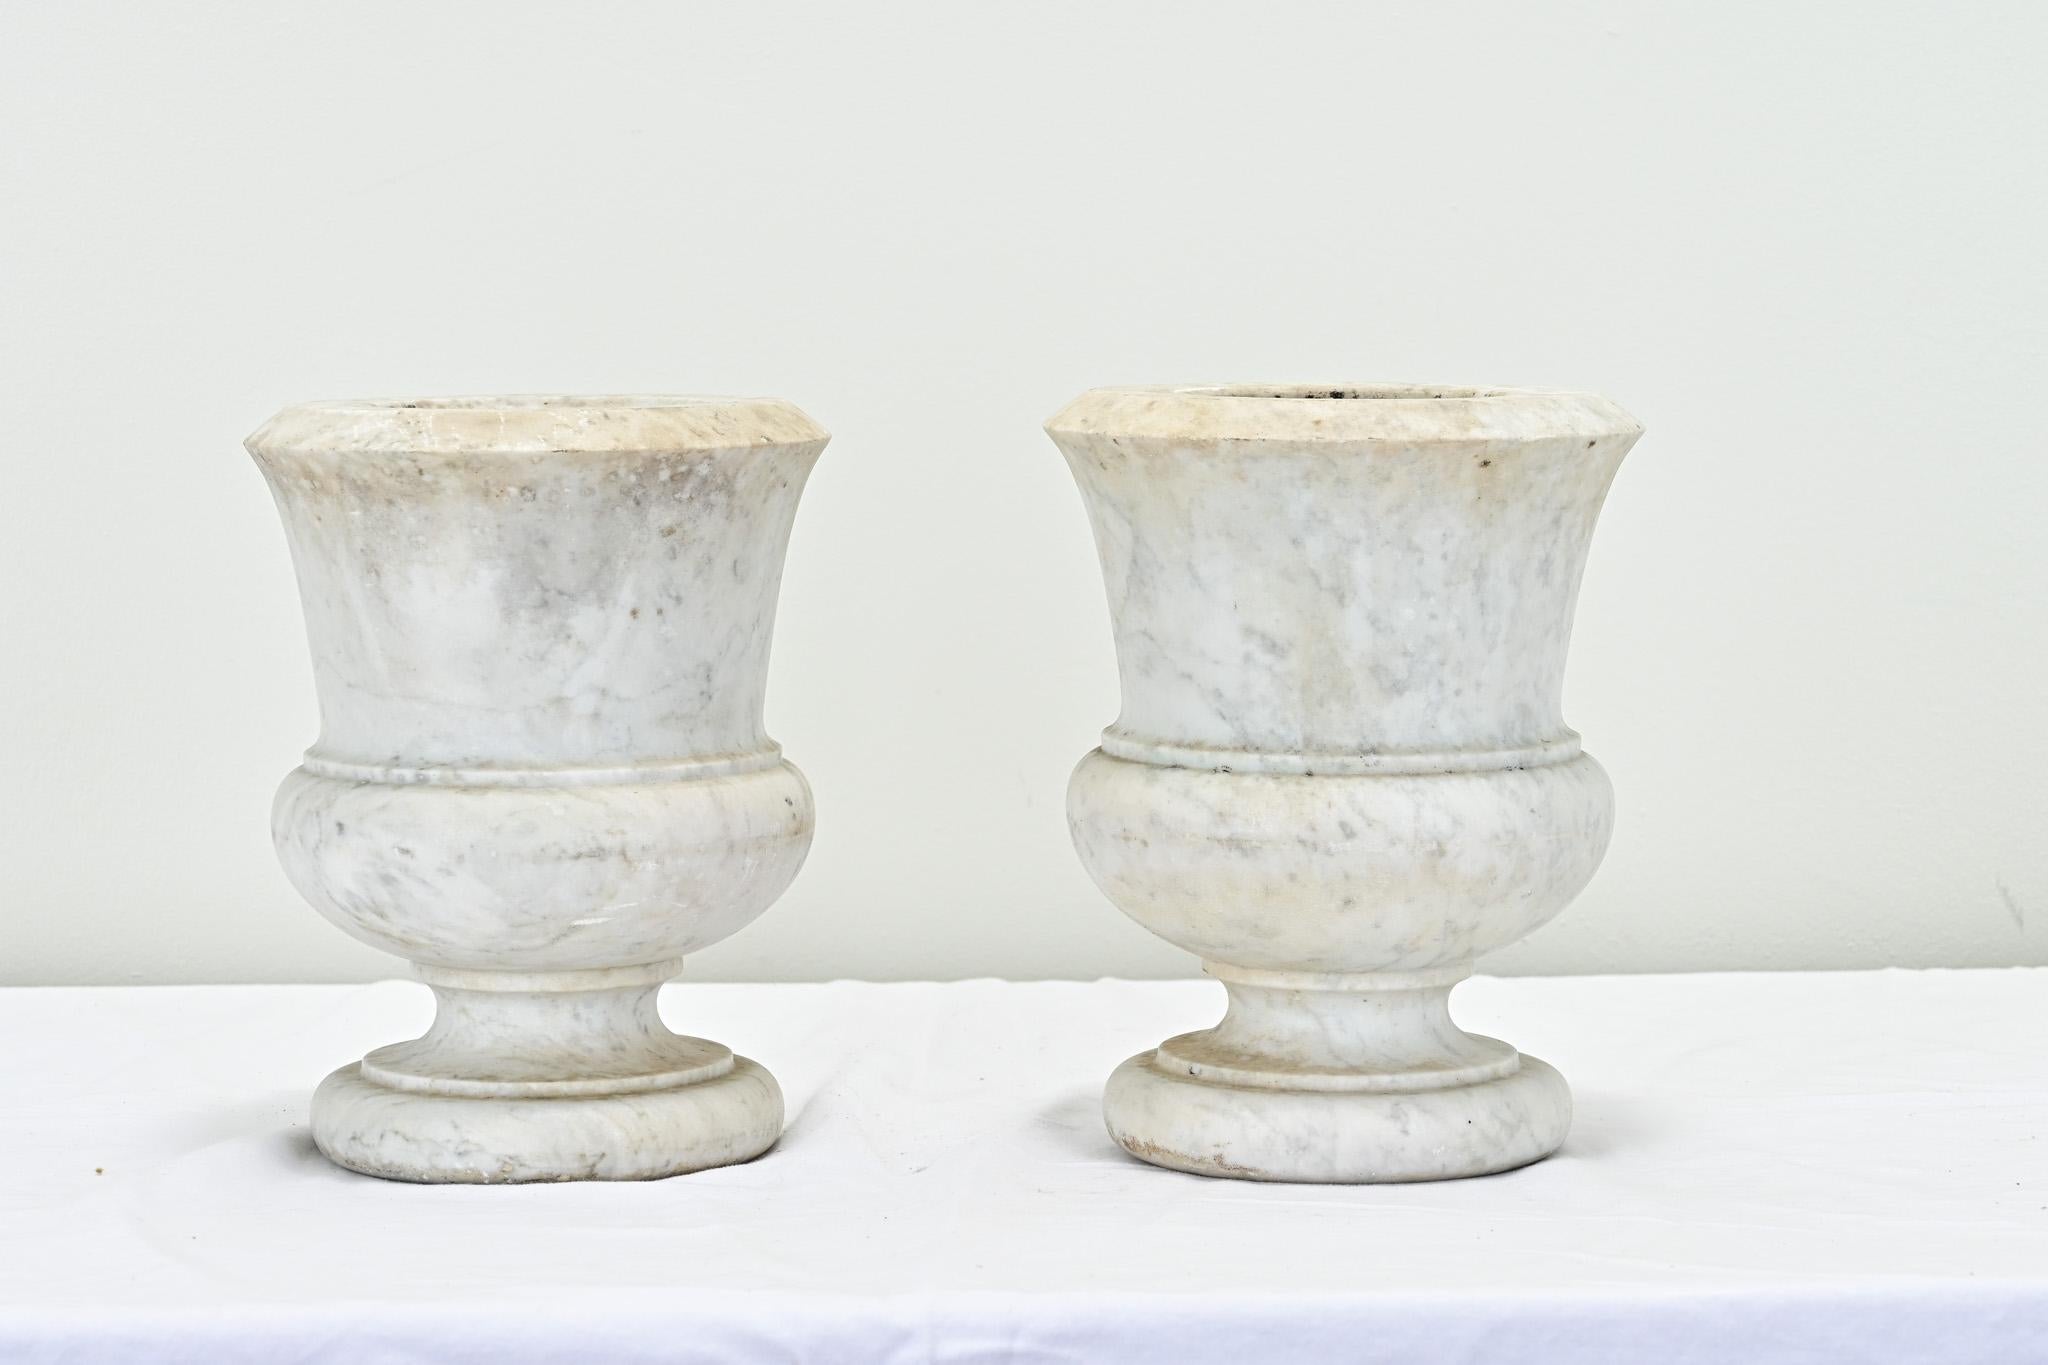 A French pair of heavy urns hand chiseled from one piece of marble. The smooth and worn marble is full of patina. Perfect for styling your mantle or other table top needing a pair. The interior is carved out measuring 5 ¾” H x 4” Diameter. Be sure